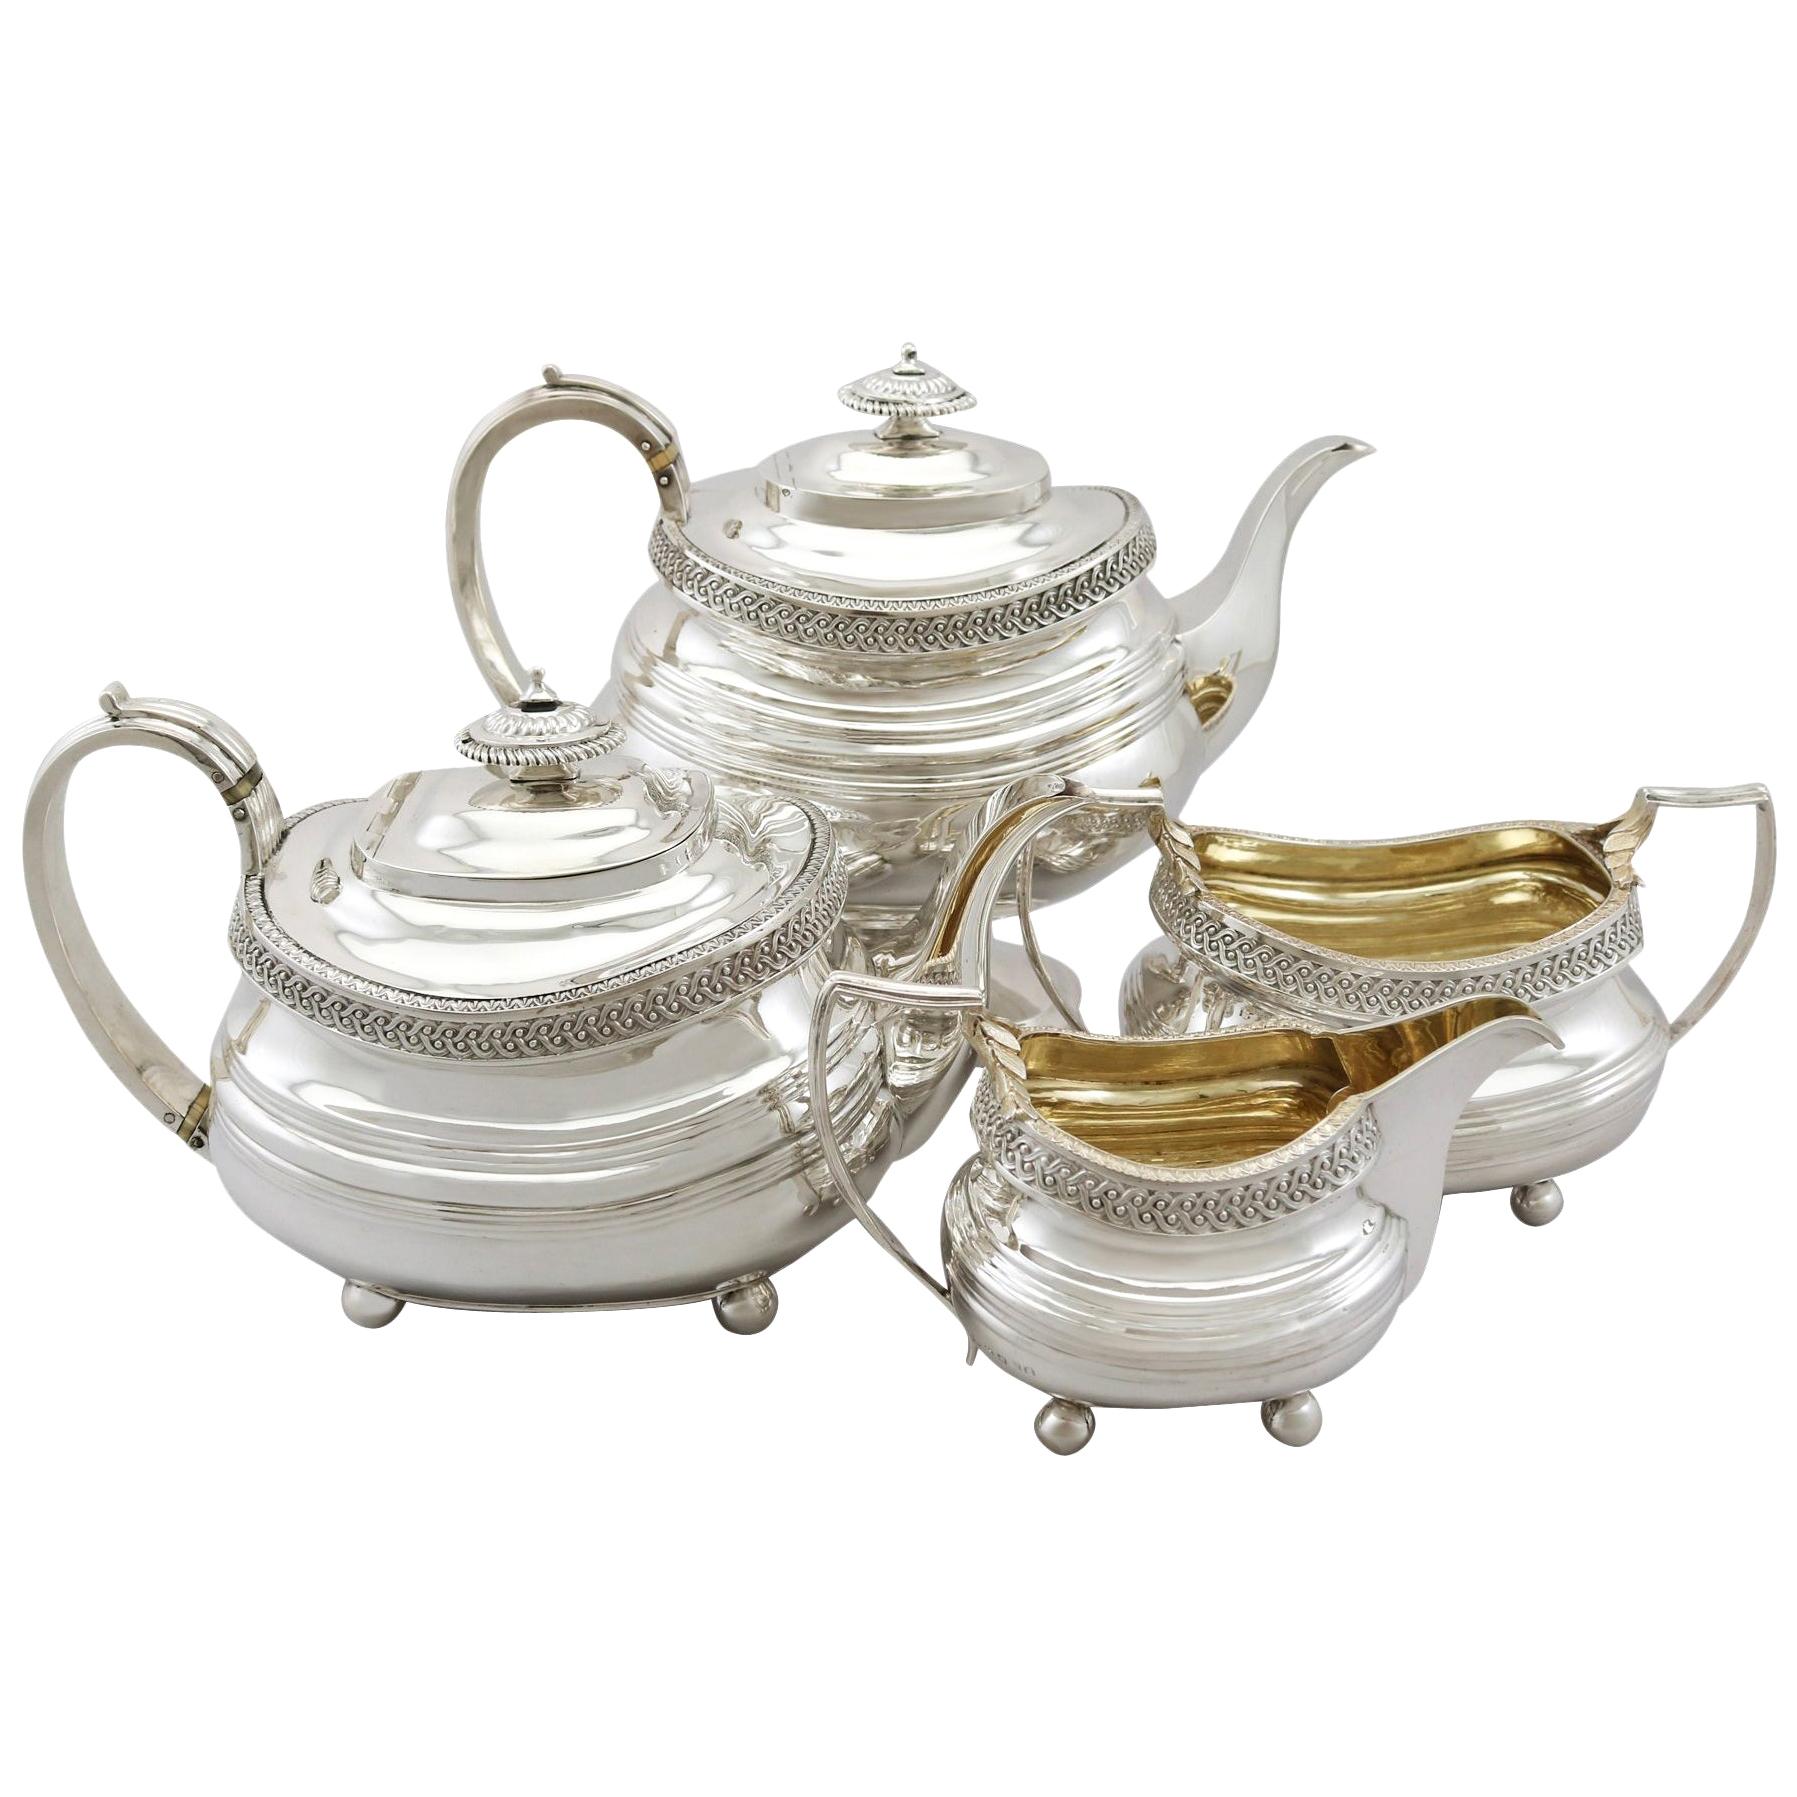 19th Century Sterling Silver Four Piece Tea Service